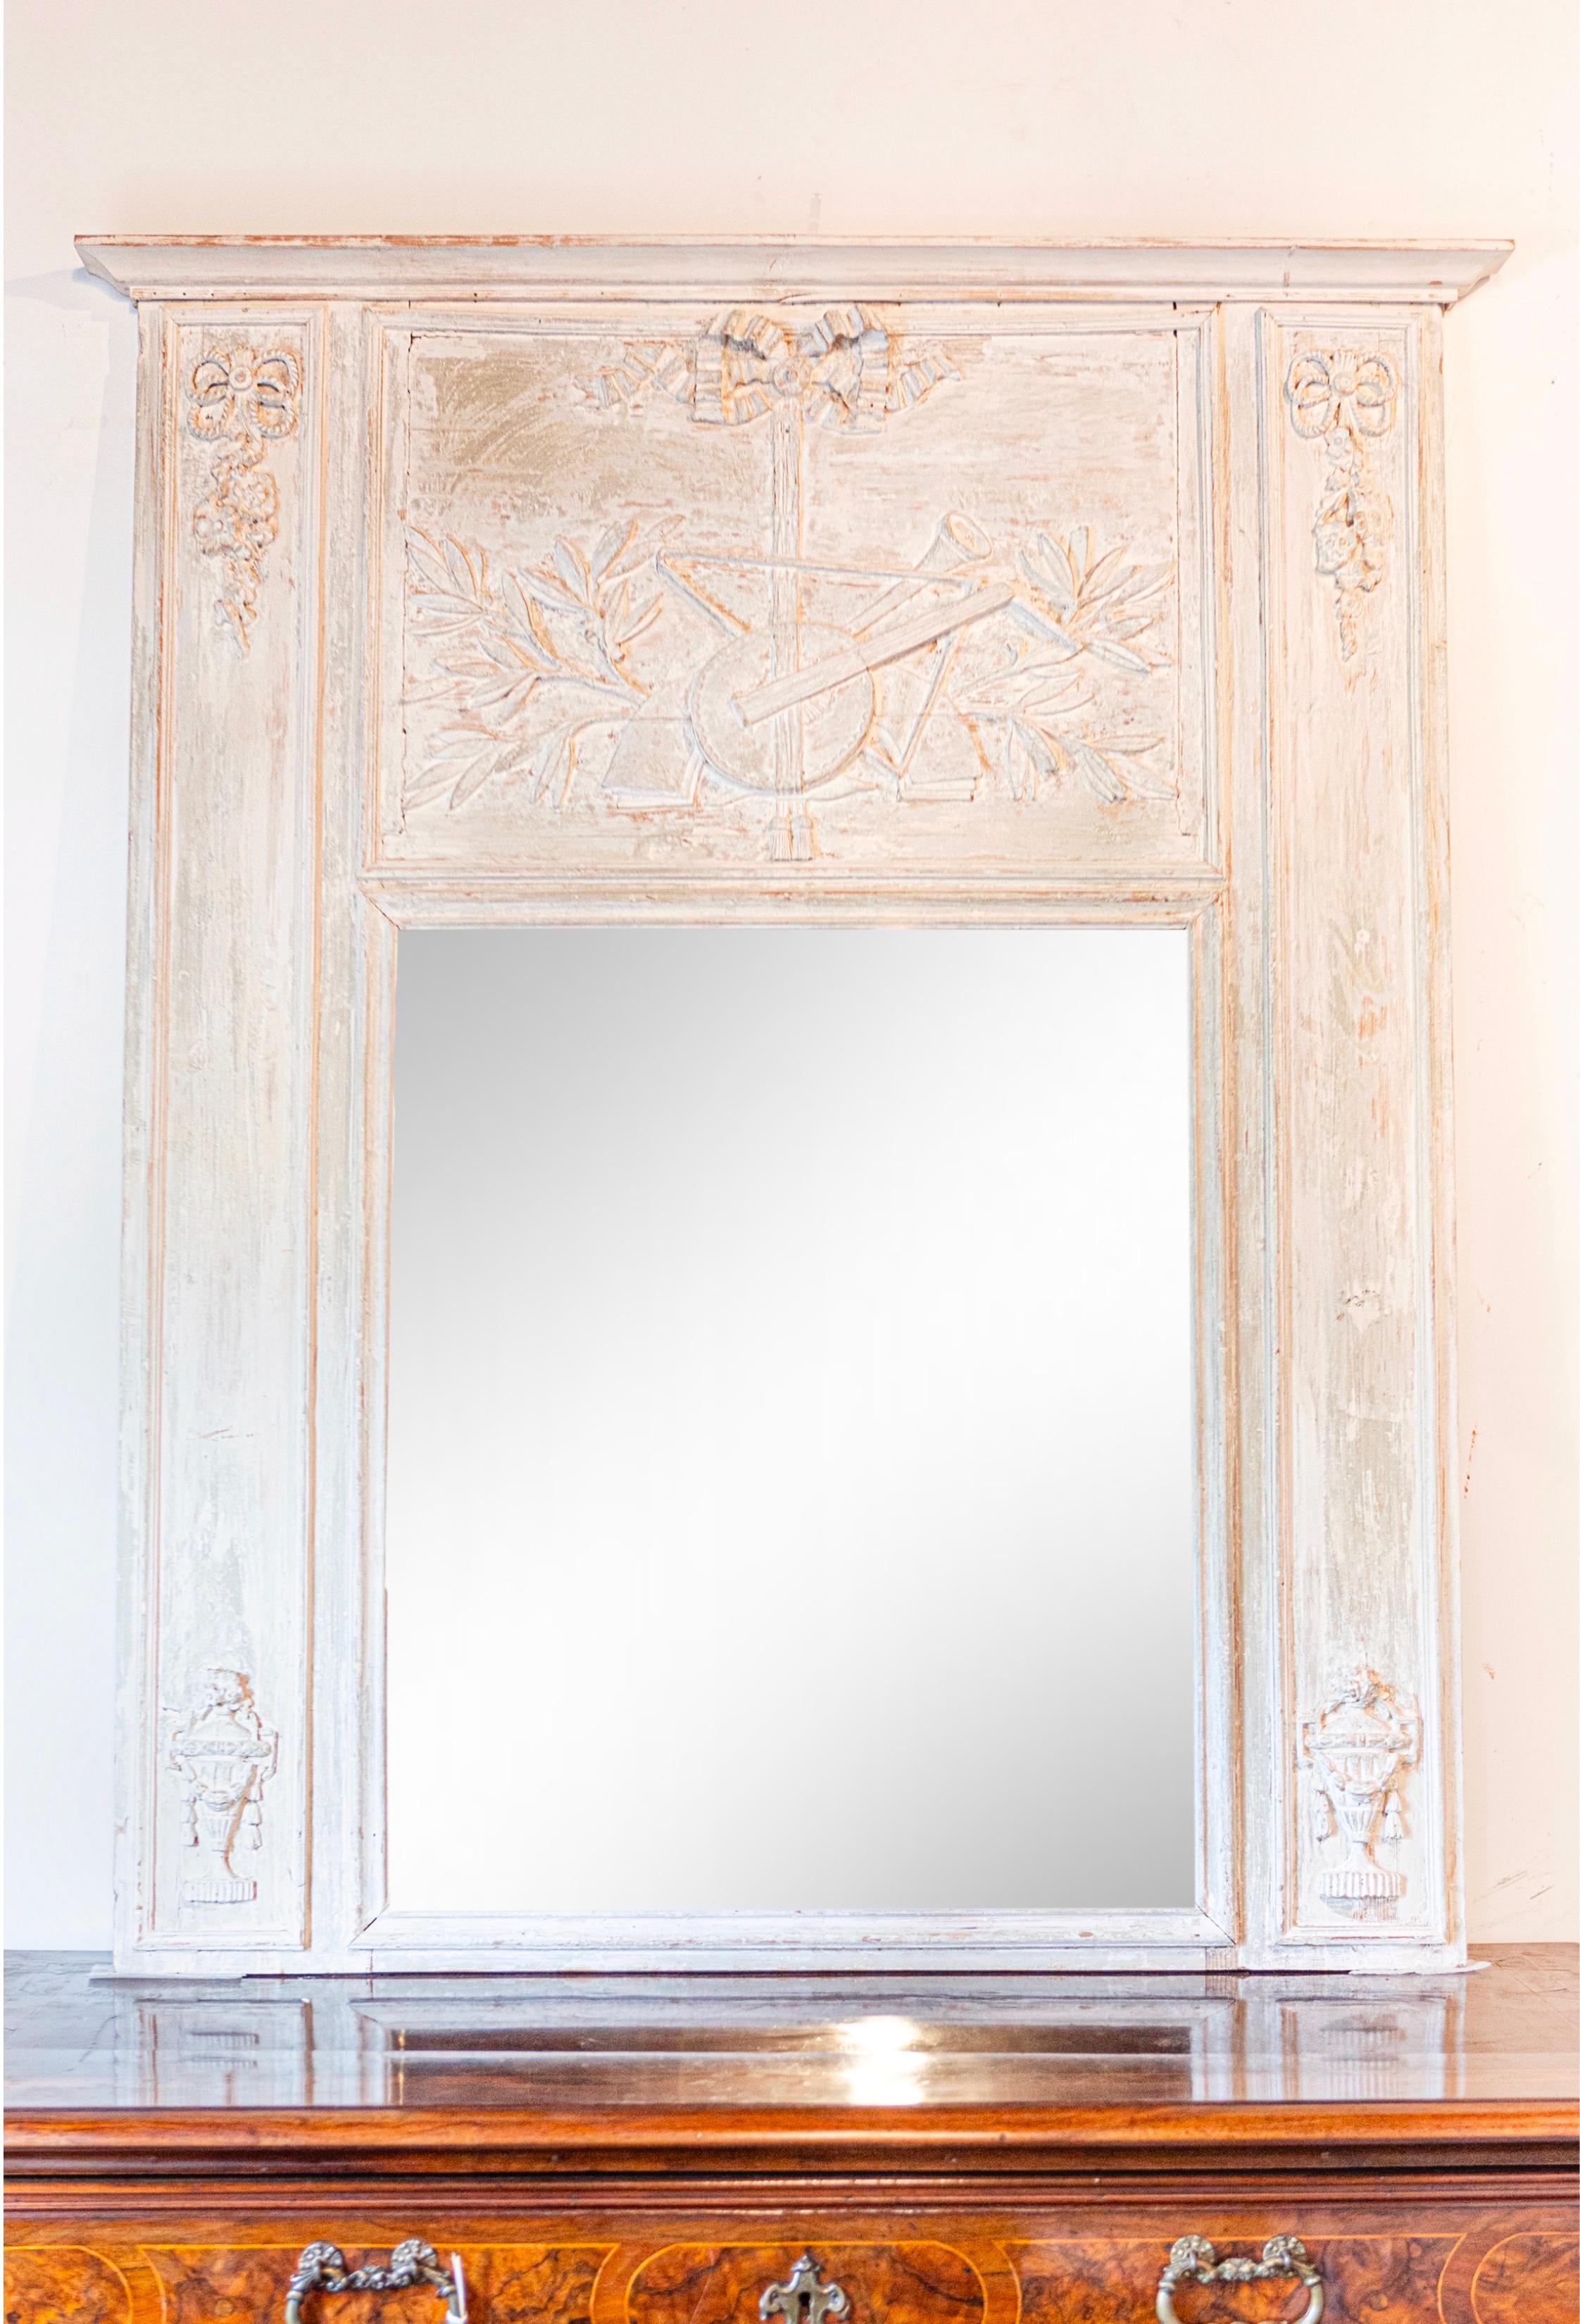 A French Louis XVI period trumeau mirror from circa 1790 with partial stripped finish and carved Liberal Arts allegory. This captivating French Louis XVI period trumeau mirror, dating back to circa 1790, is a testament to the elegant artistry of the